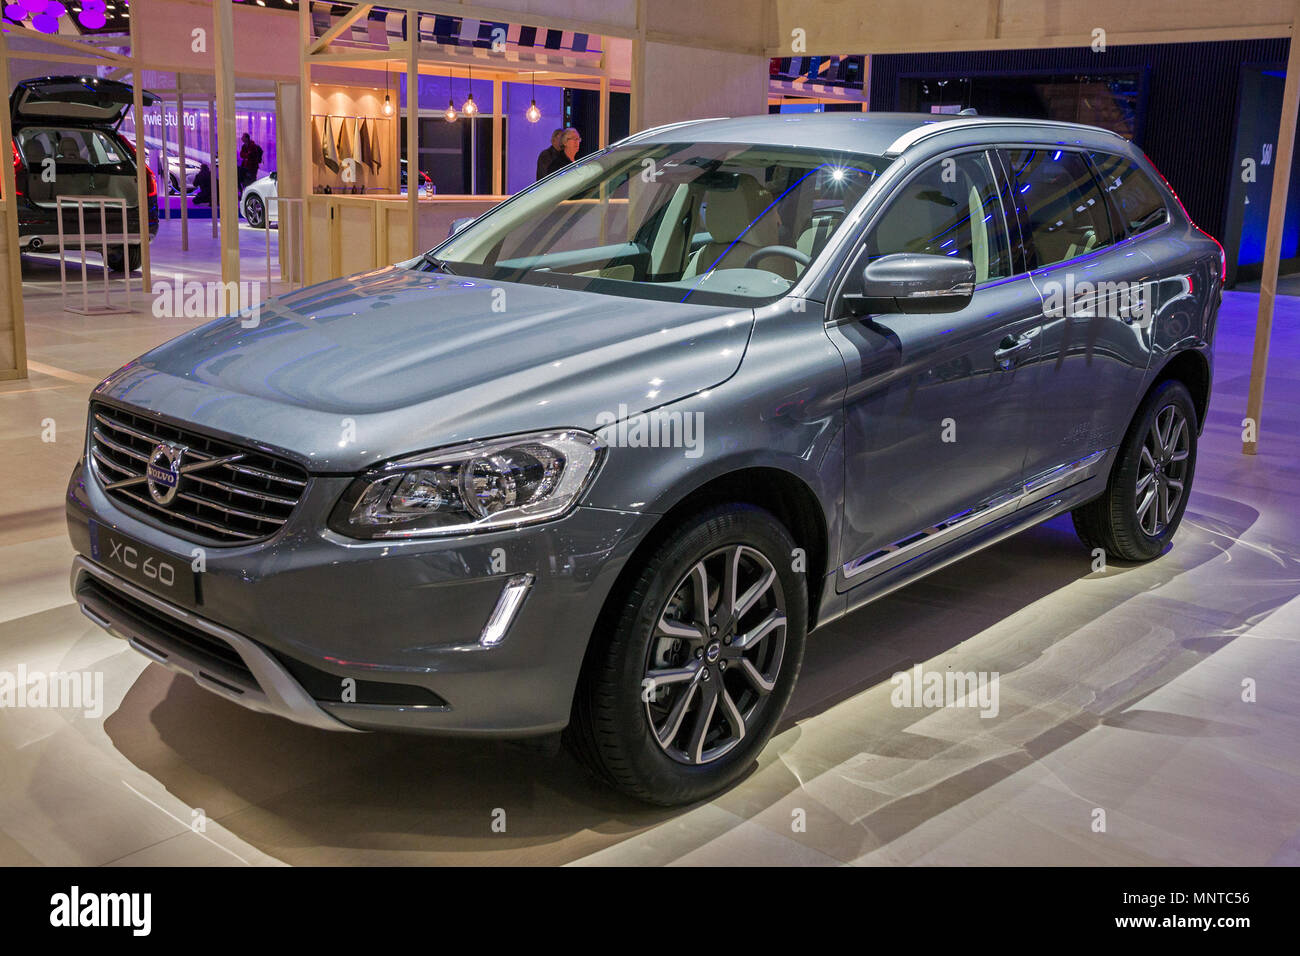 BRUSSELS - JAN 12, 2016: Volvo XC60 compact luxury crossover SUV car showcased at the Brussels Motor Show. Stock Photo